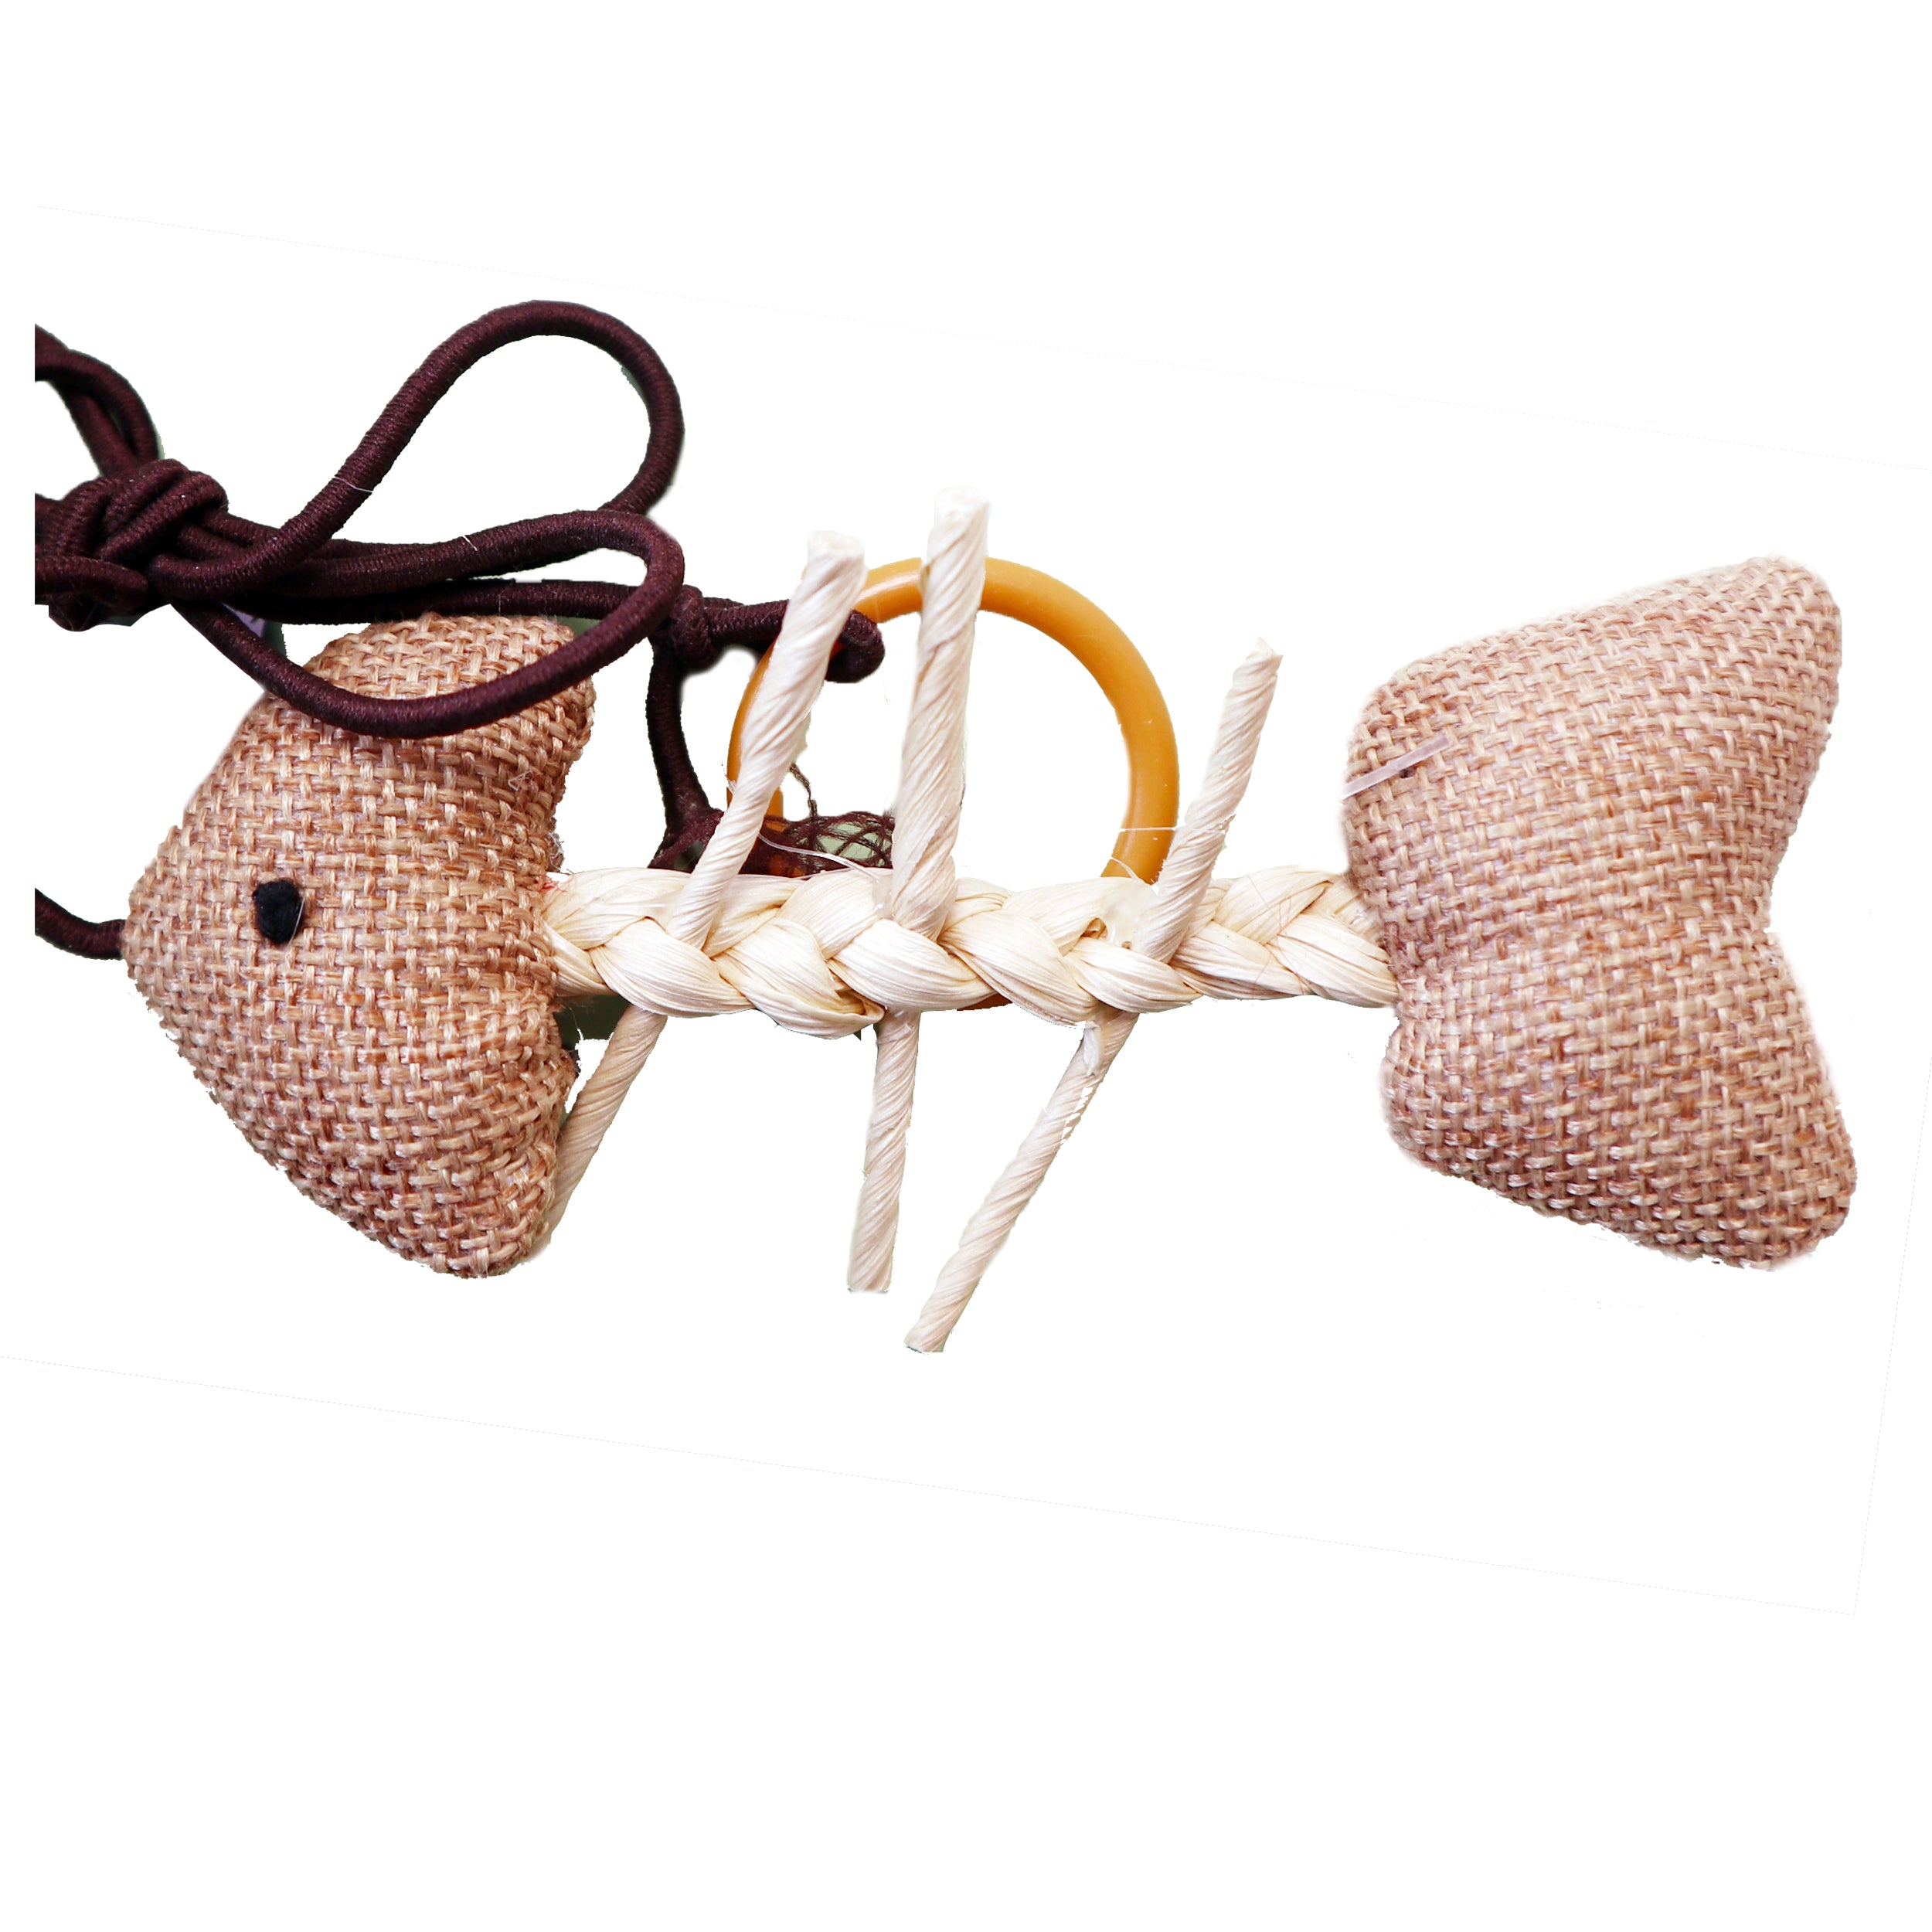 Burlap Woven Fish Skeleton Brown String With Ring Toy for Interactive play with Cats and Kittens